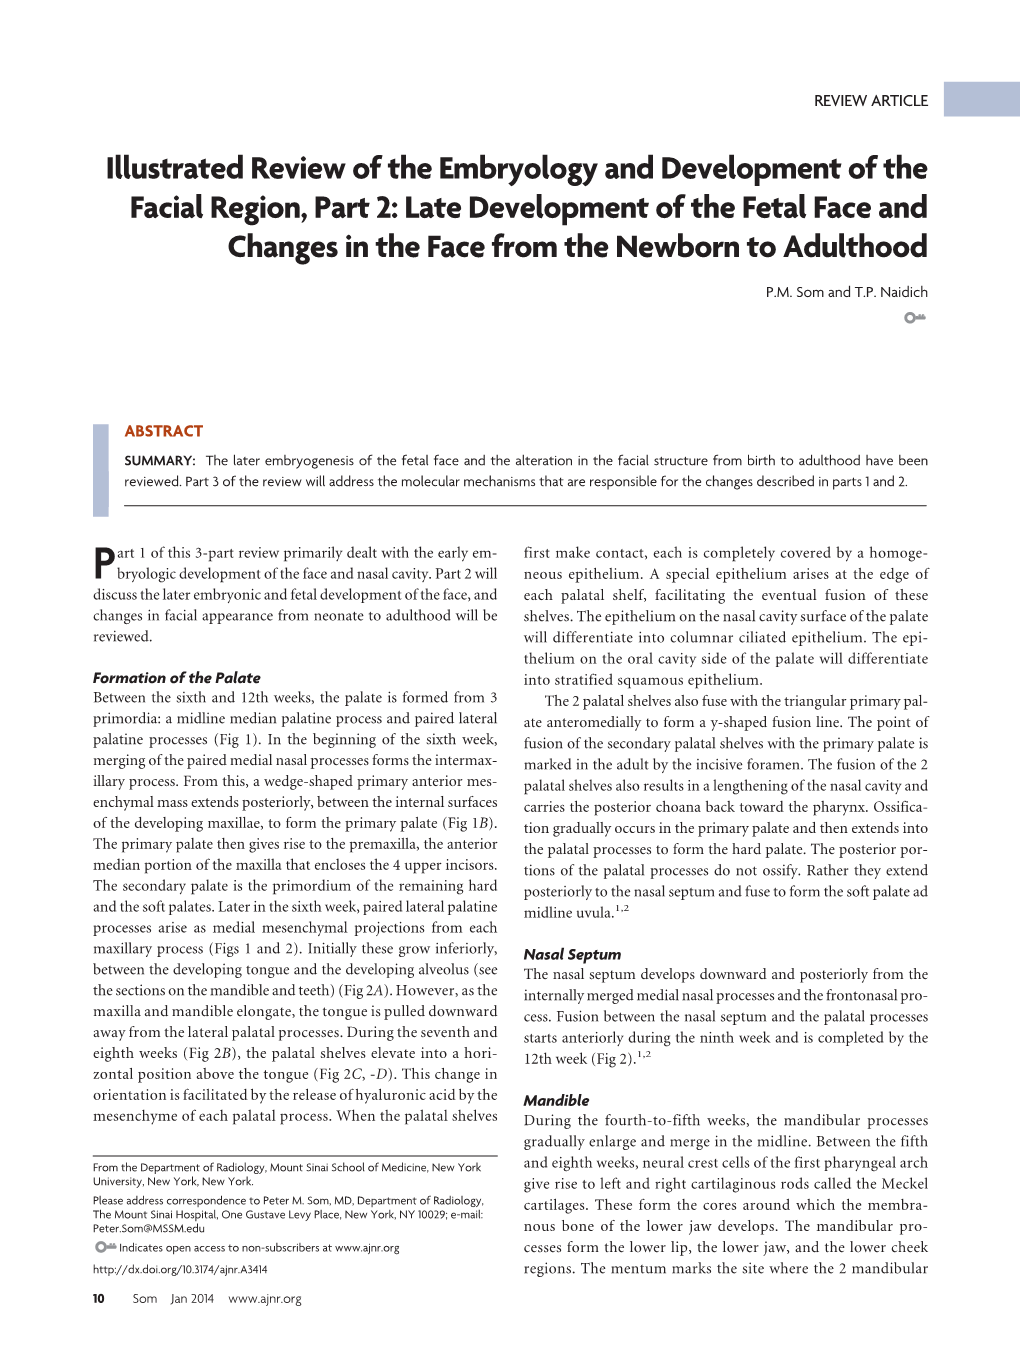 Illustrated Review of the Embryology and Development of the Facial